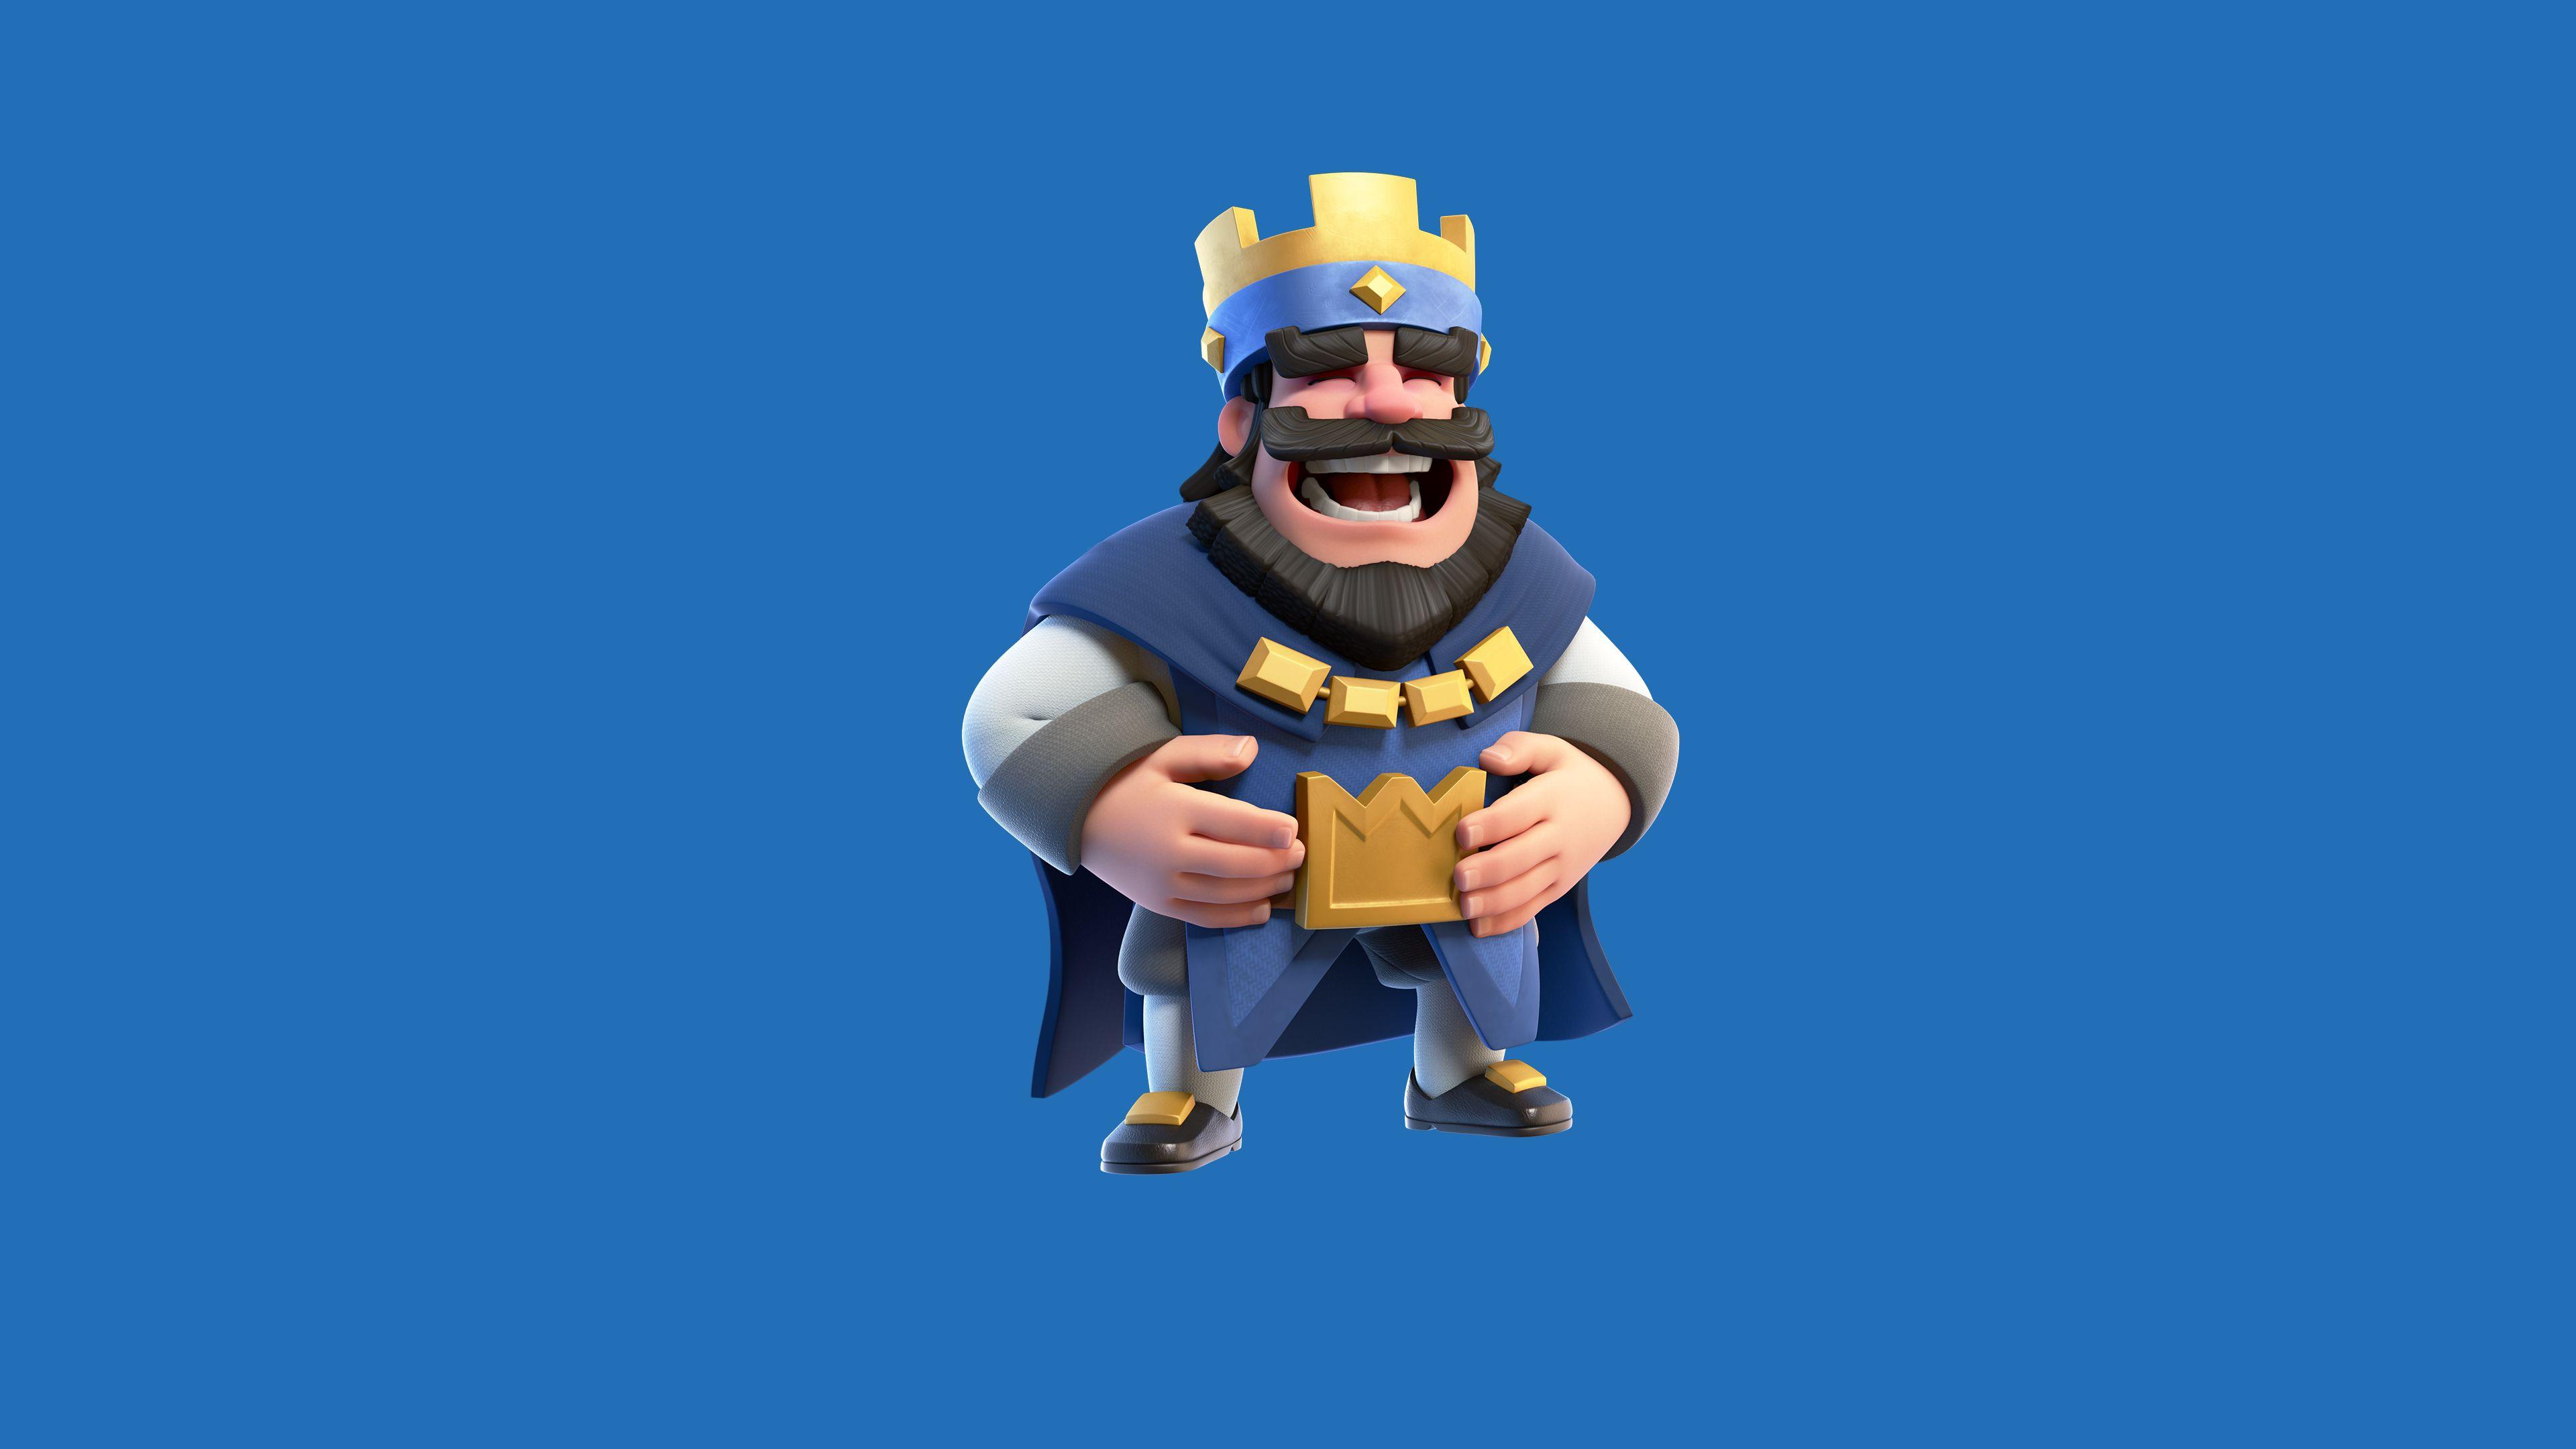 Clash Royale King Wallpapers - Wallpaper Cave